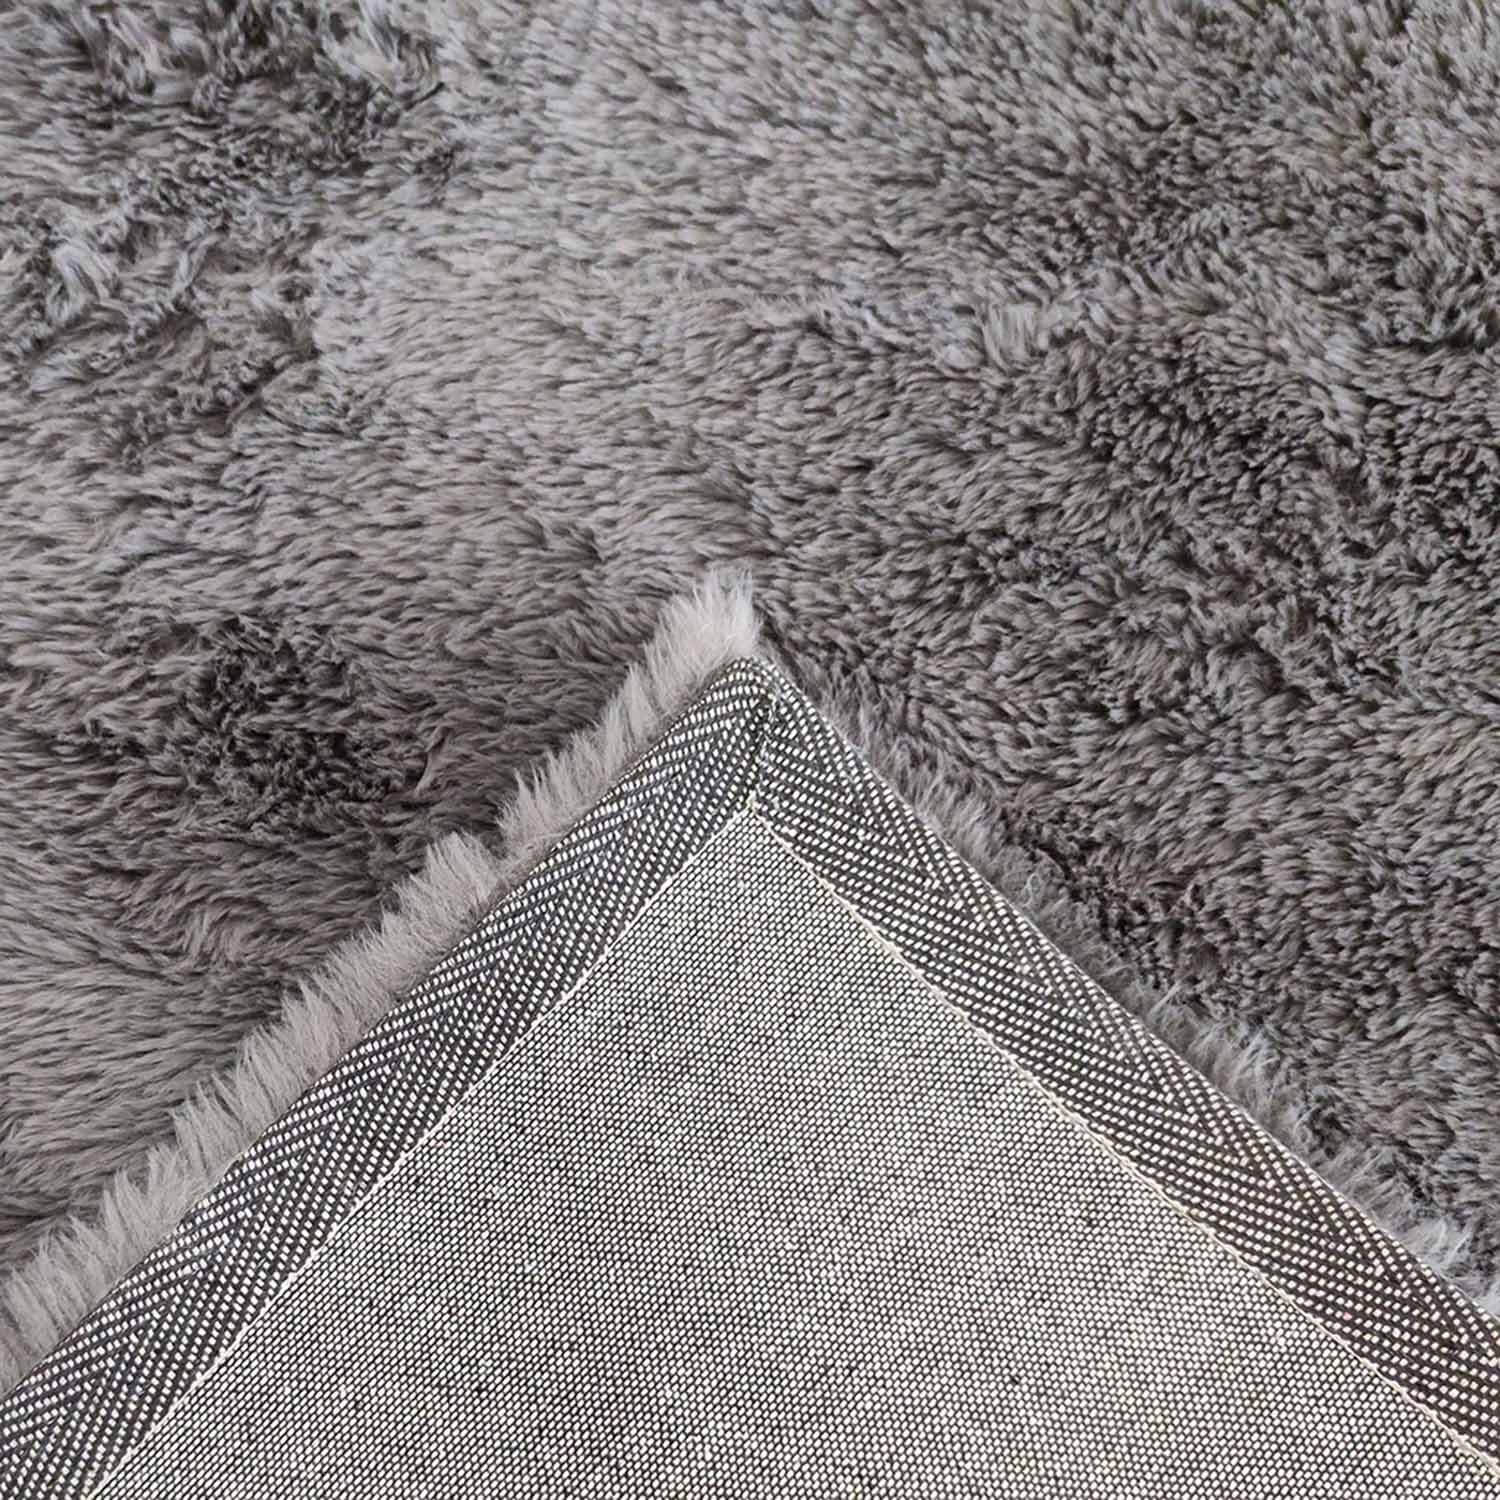 The Home Living Room Sheepskin Rug 120cm x 160cm - Charcoal 3 Shaws Department Stores